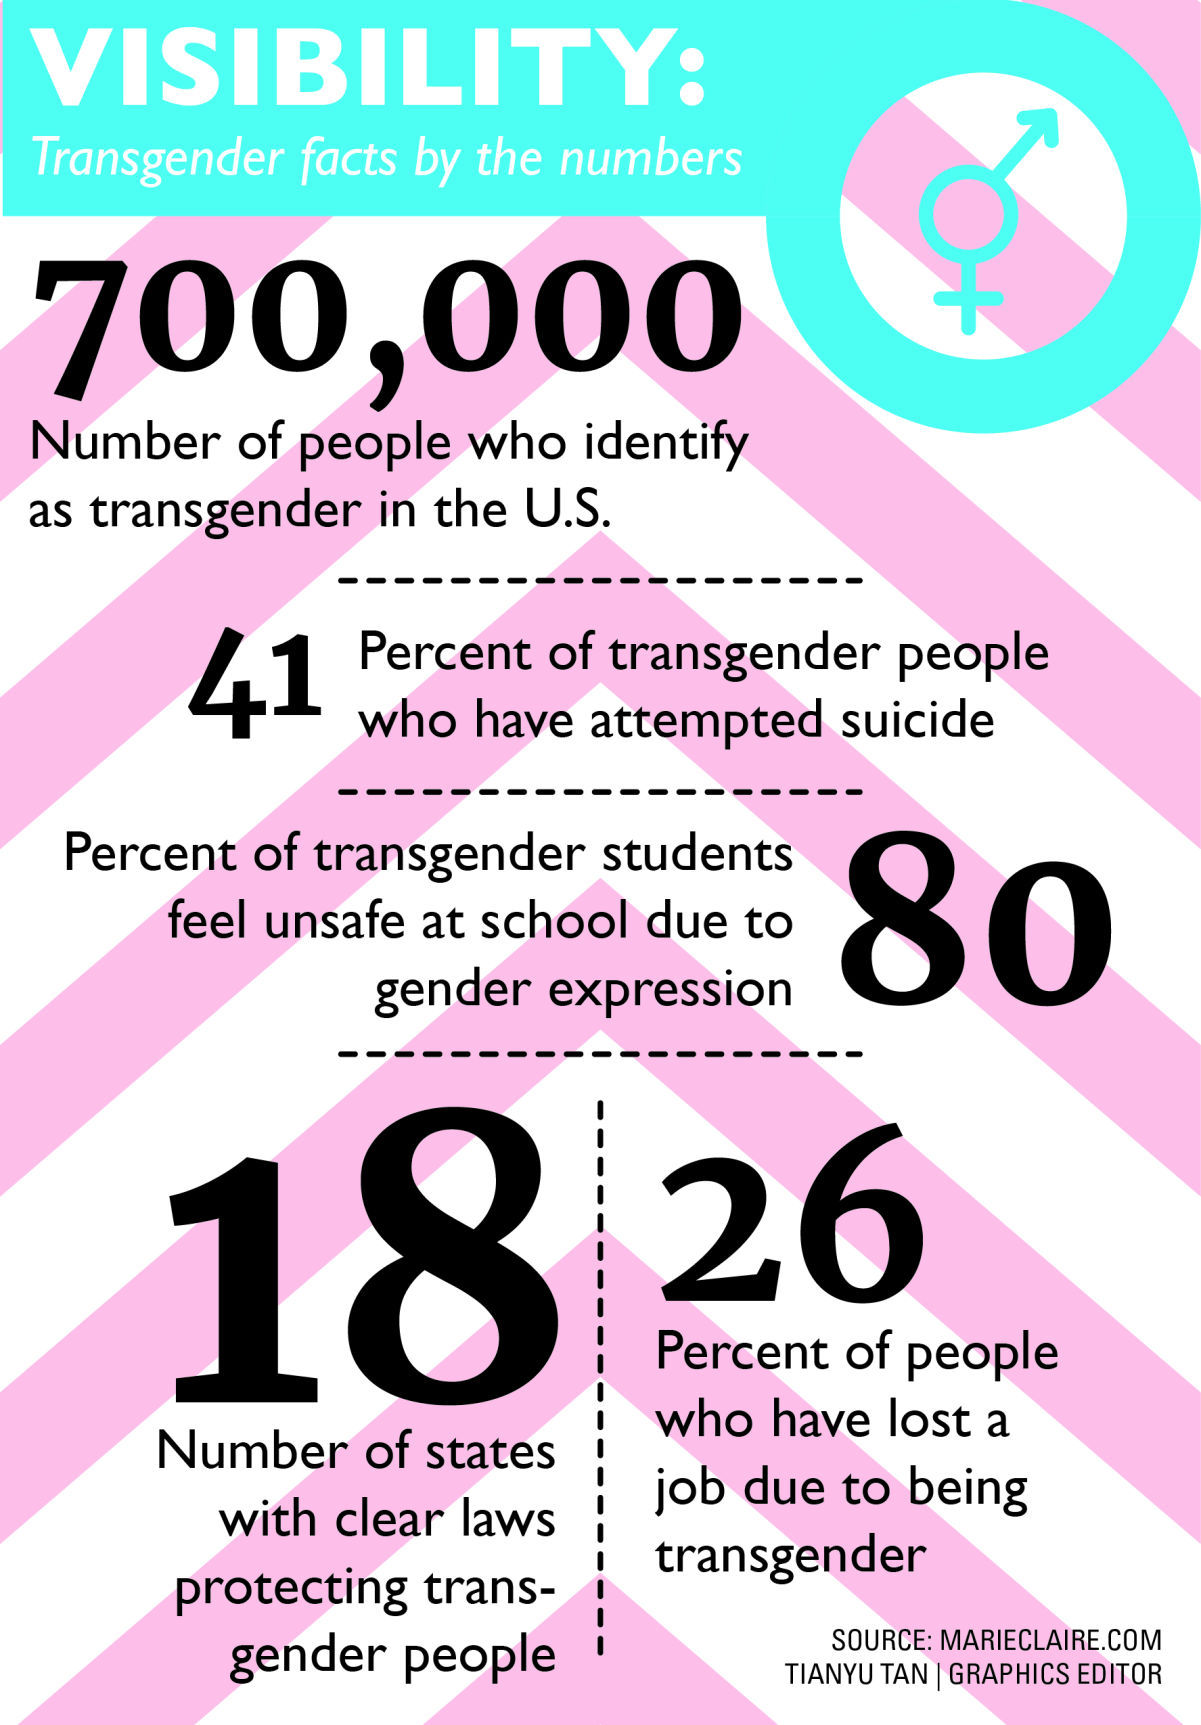 trans visibility day 2019